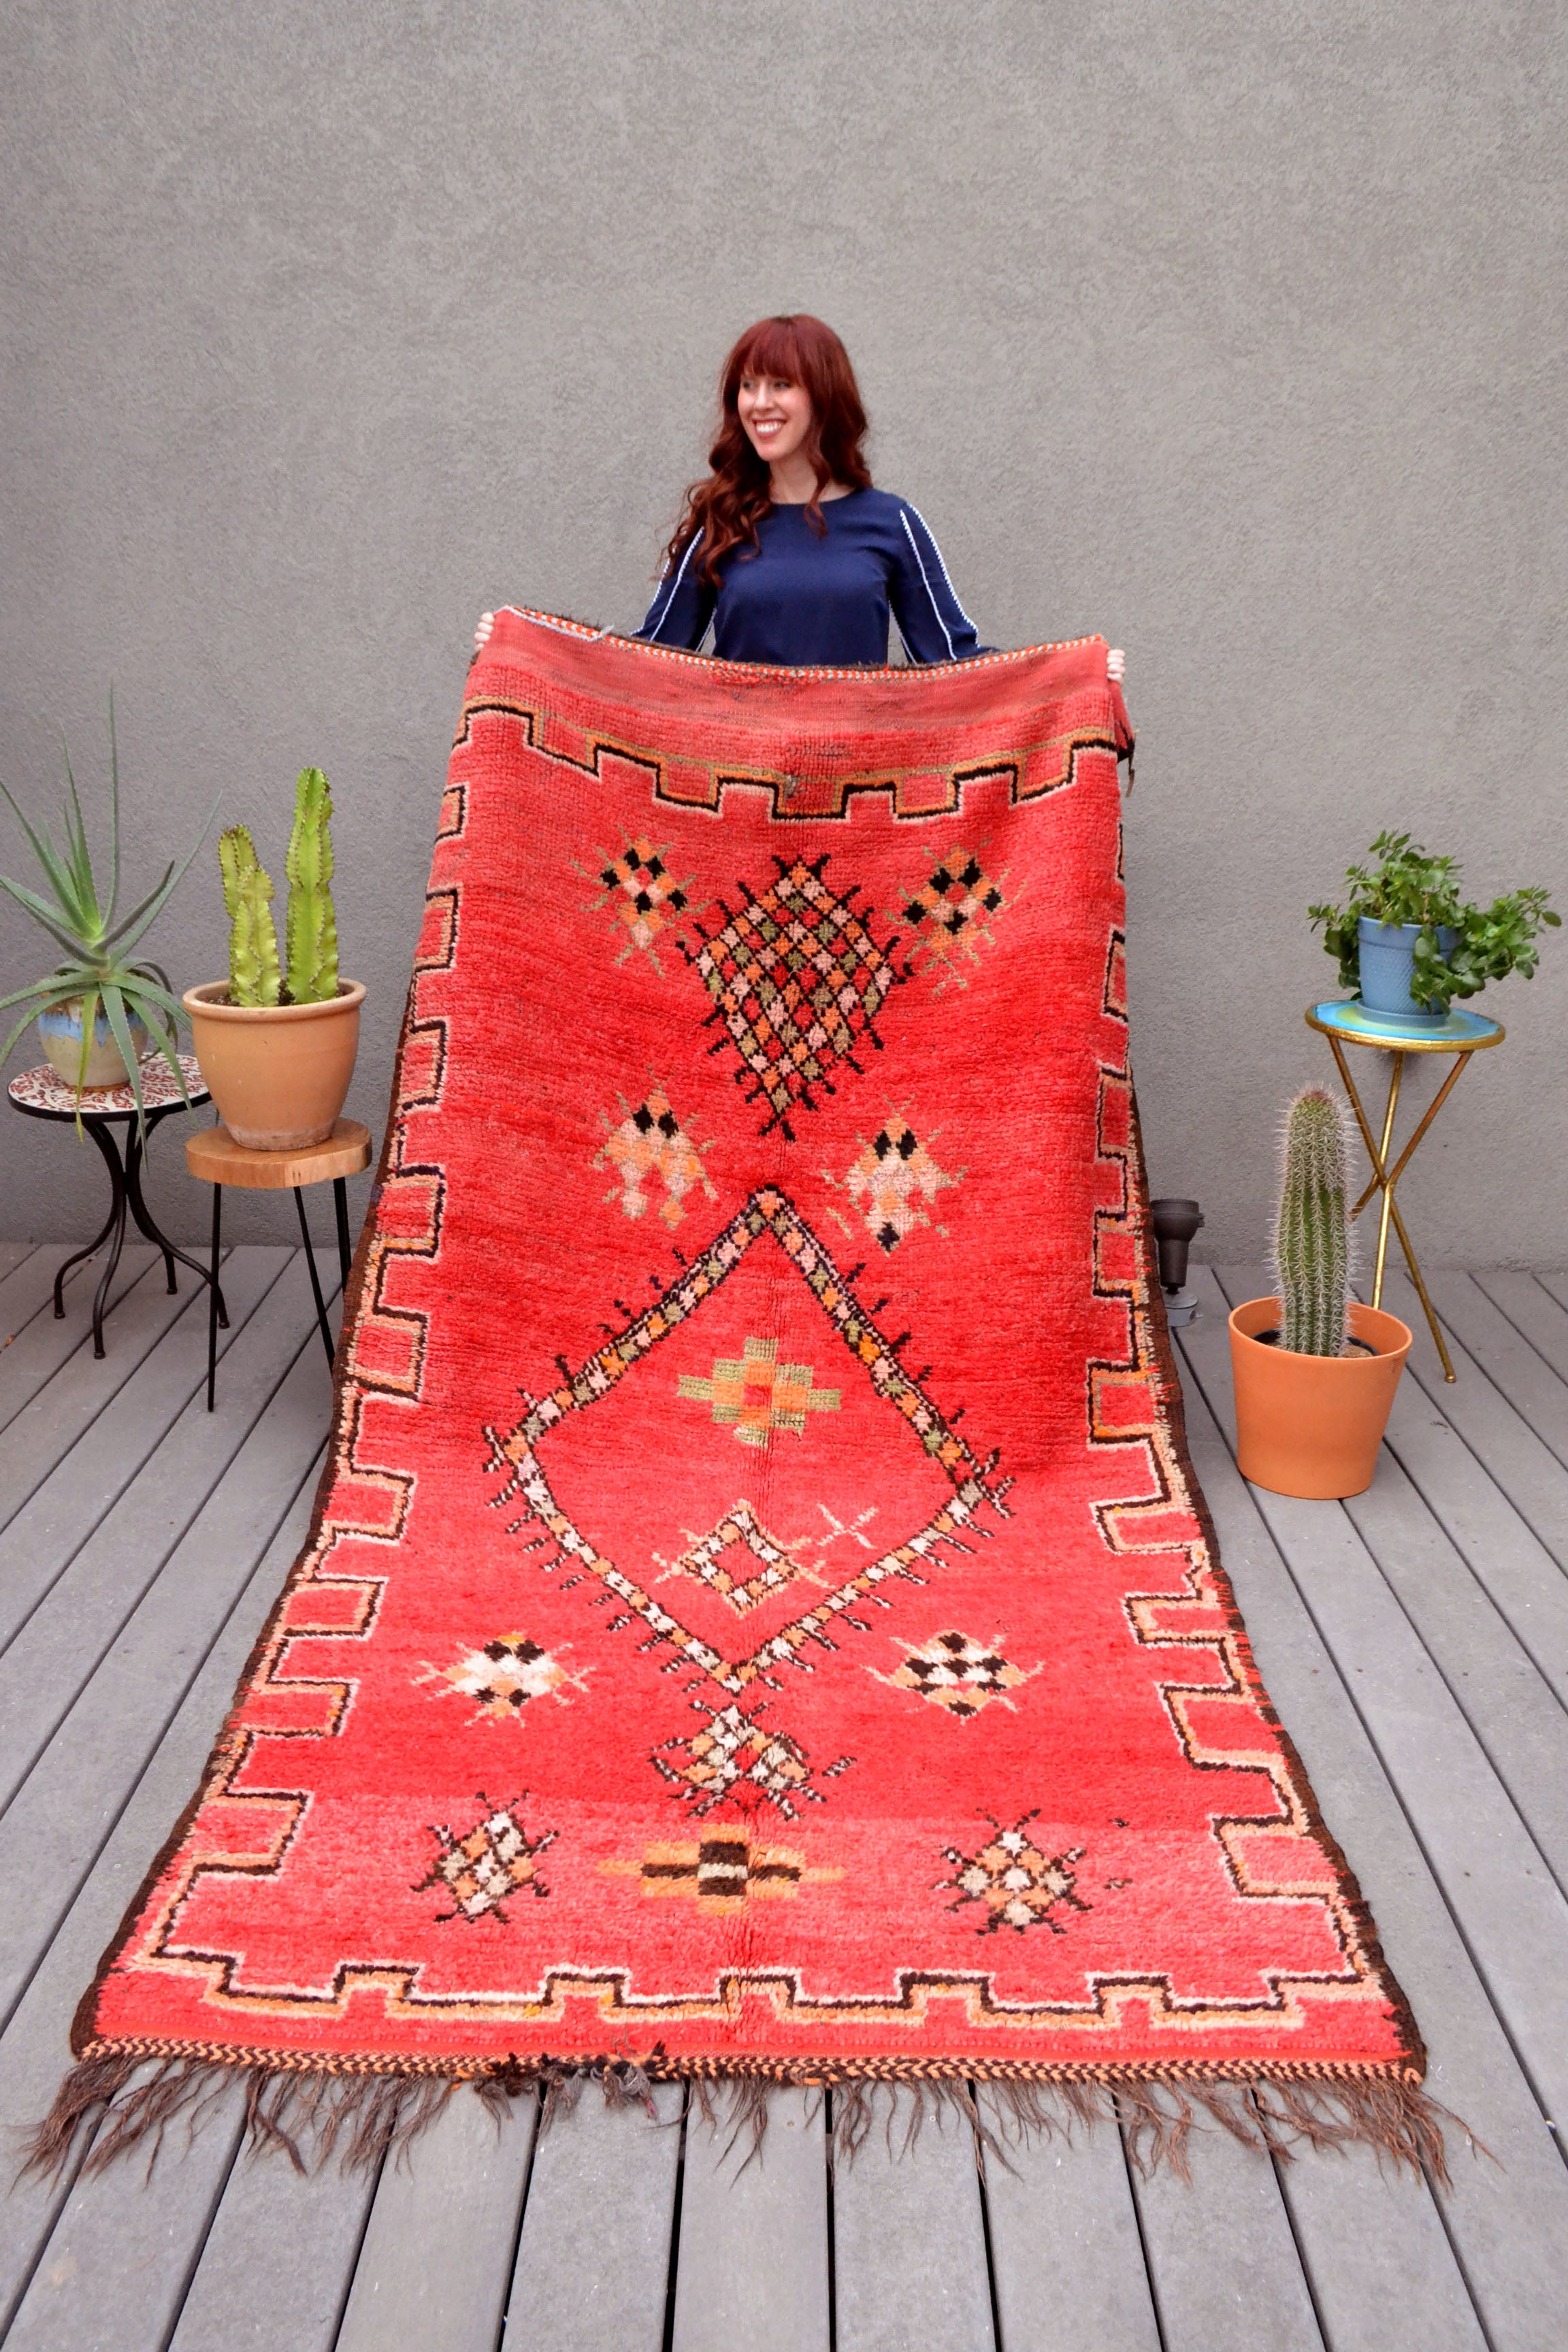 Red Vintage Moroccan Azilal Rug by Yuba Mercantile 